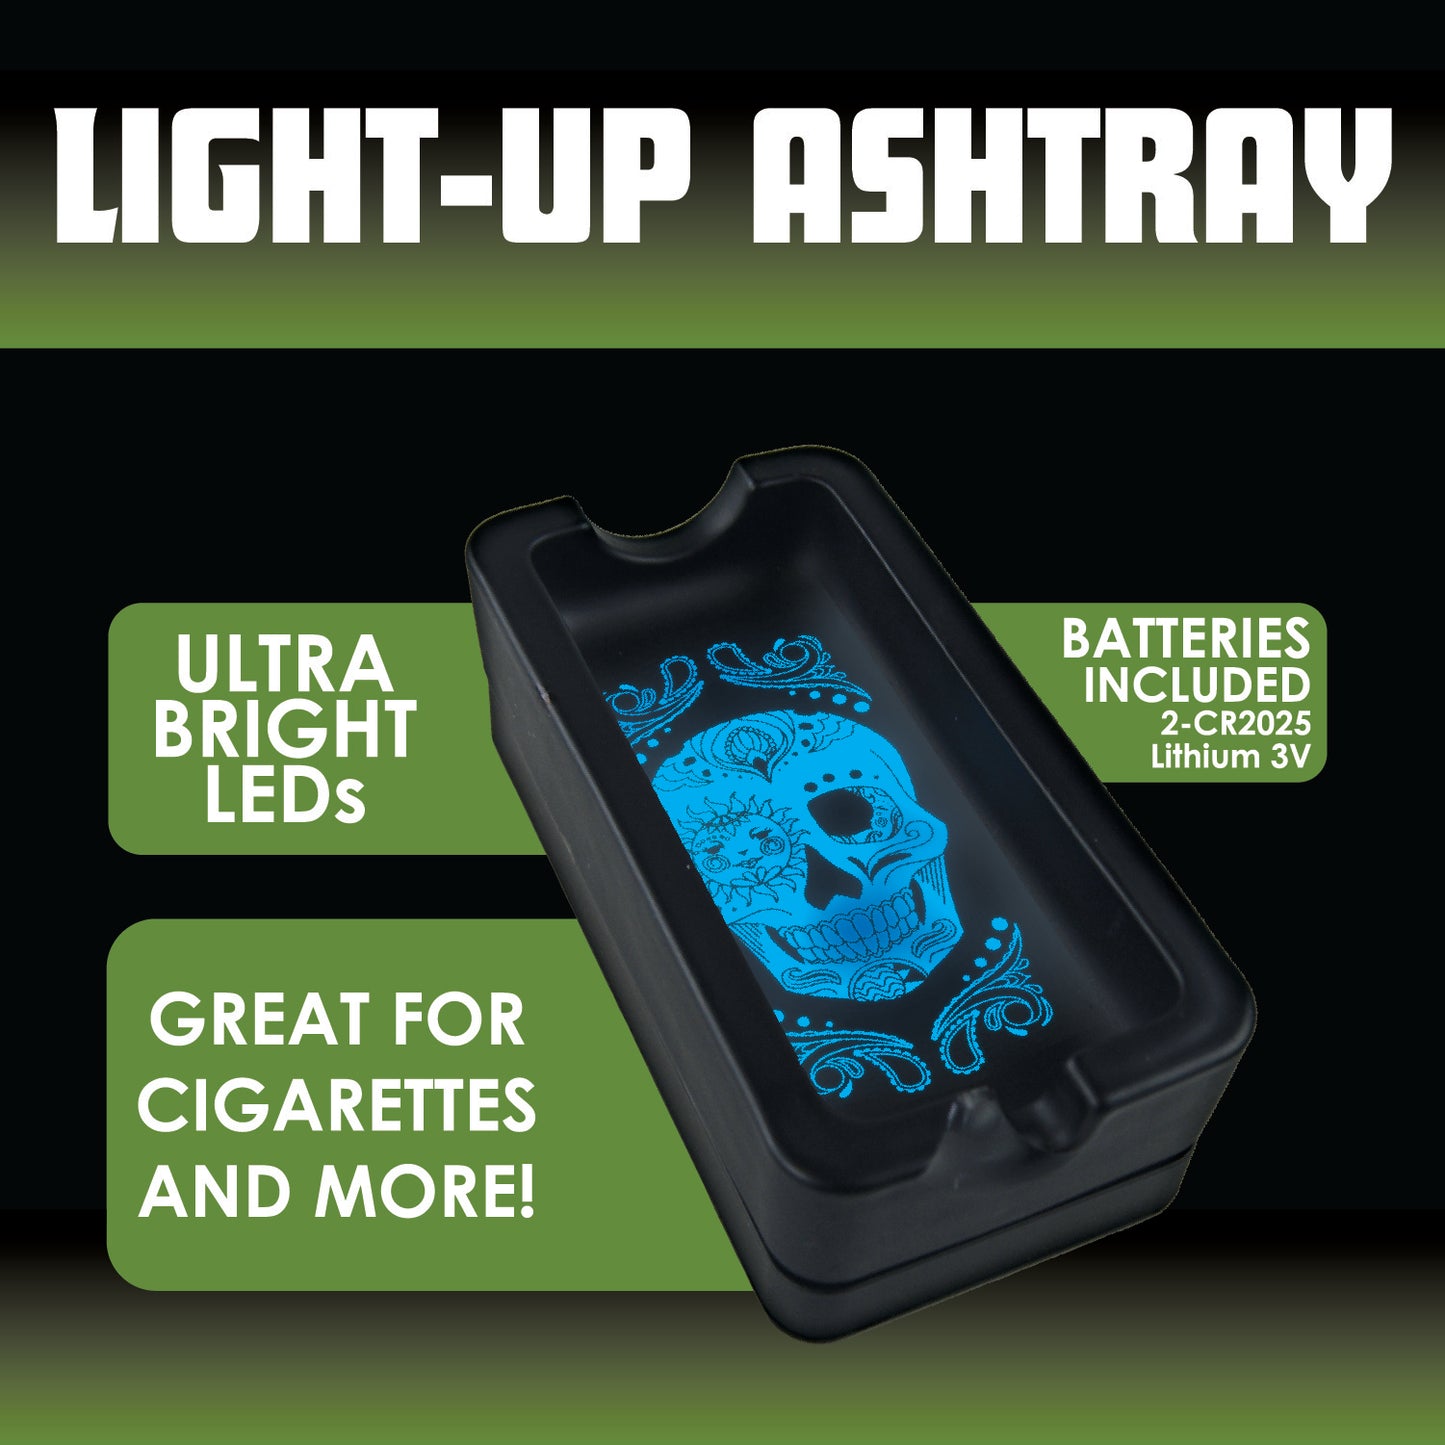 ITEM NUMBER 023104 LIGHT UP ASHTRAY 6 PIECES PER DISPLAY